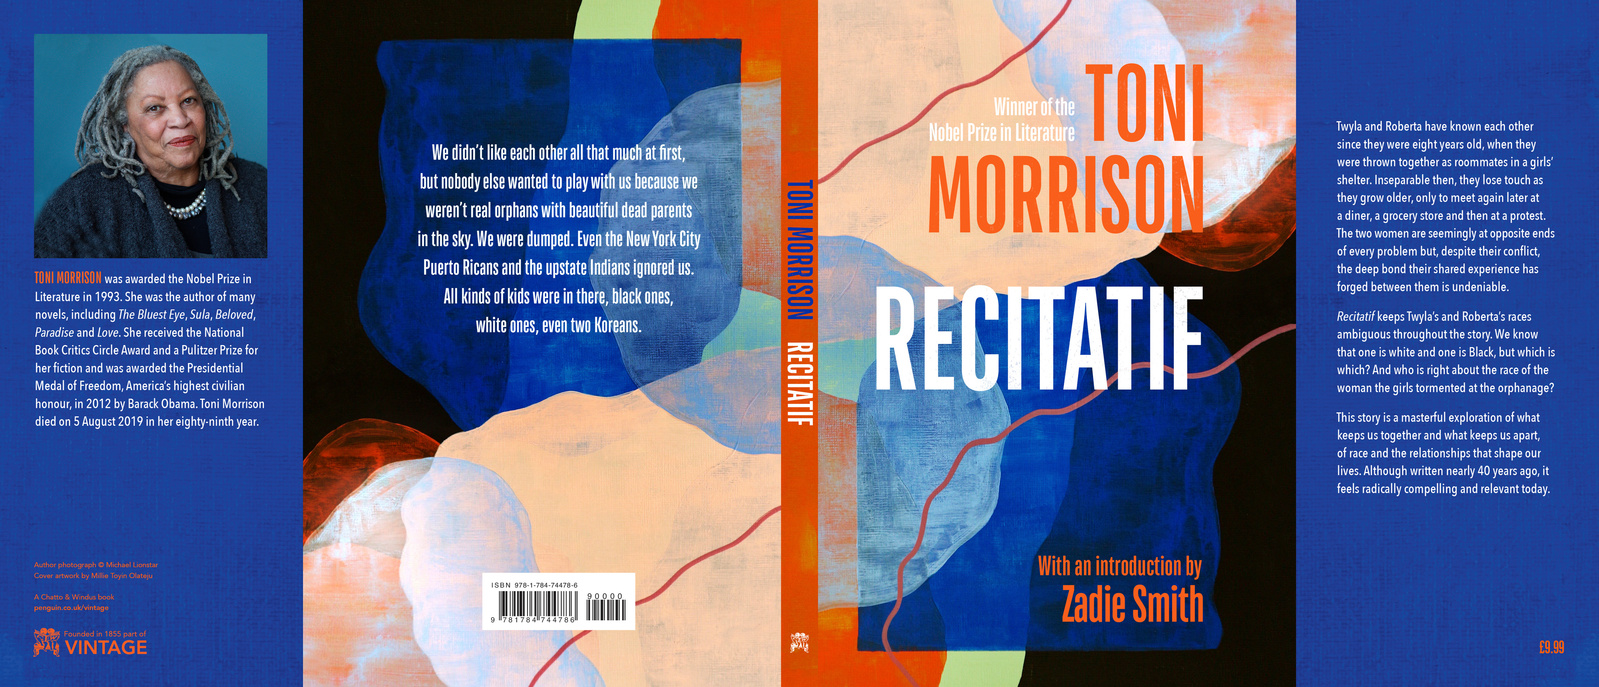 Book design by Millie Toyin Olateju and Kris Potter for Recitatif cover by Toni Morrison 